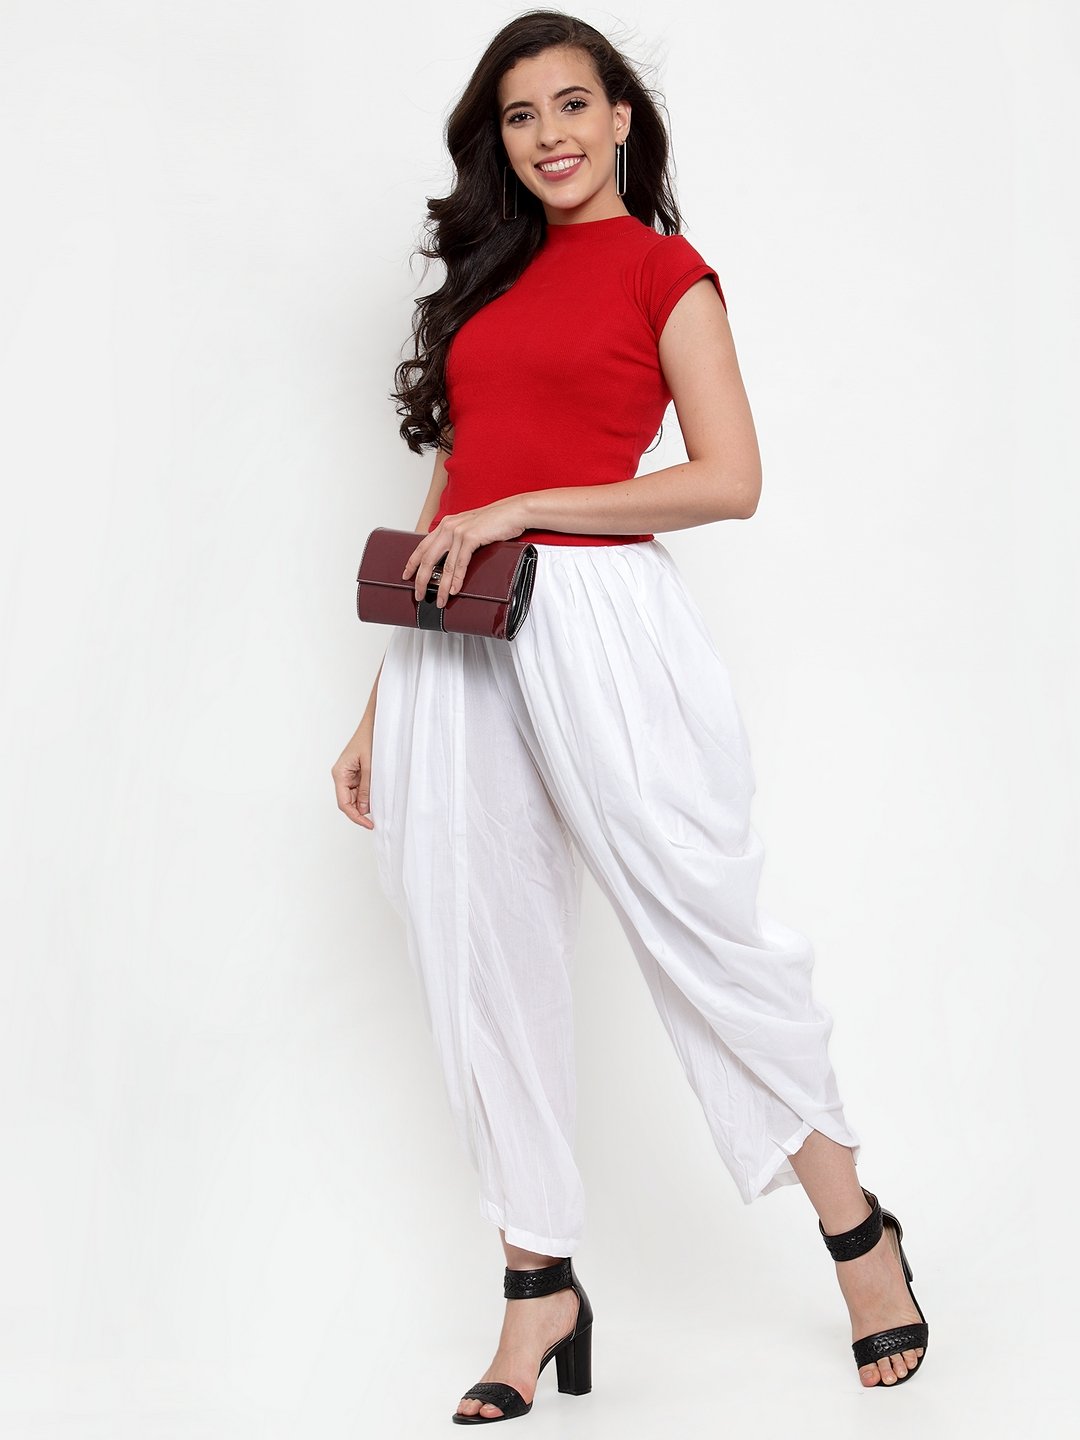 Women's White Solid Dhoti - Jompers